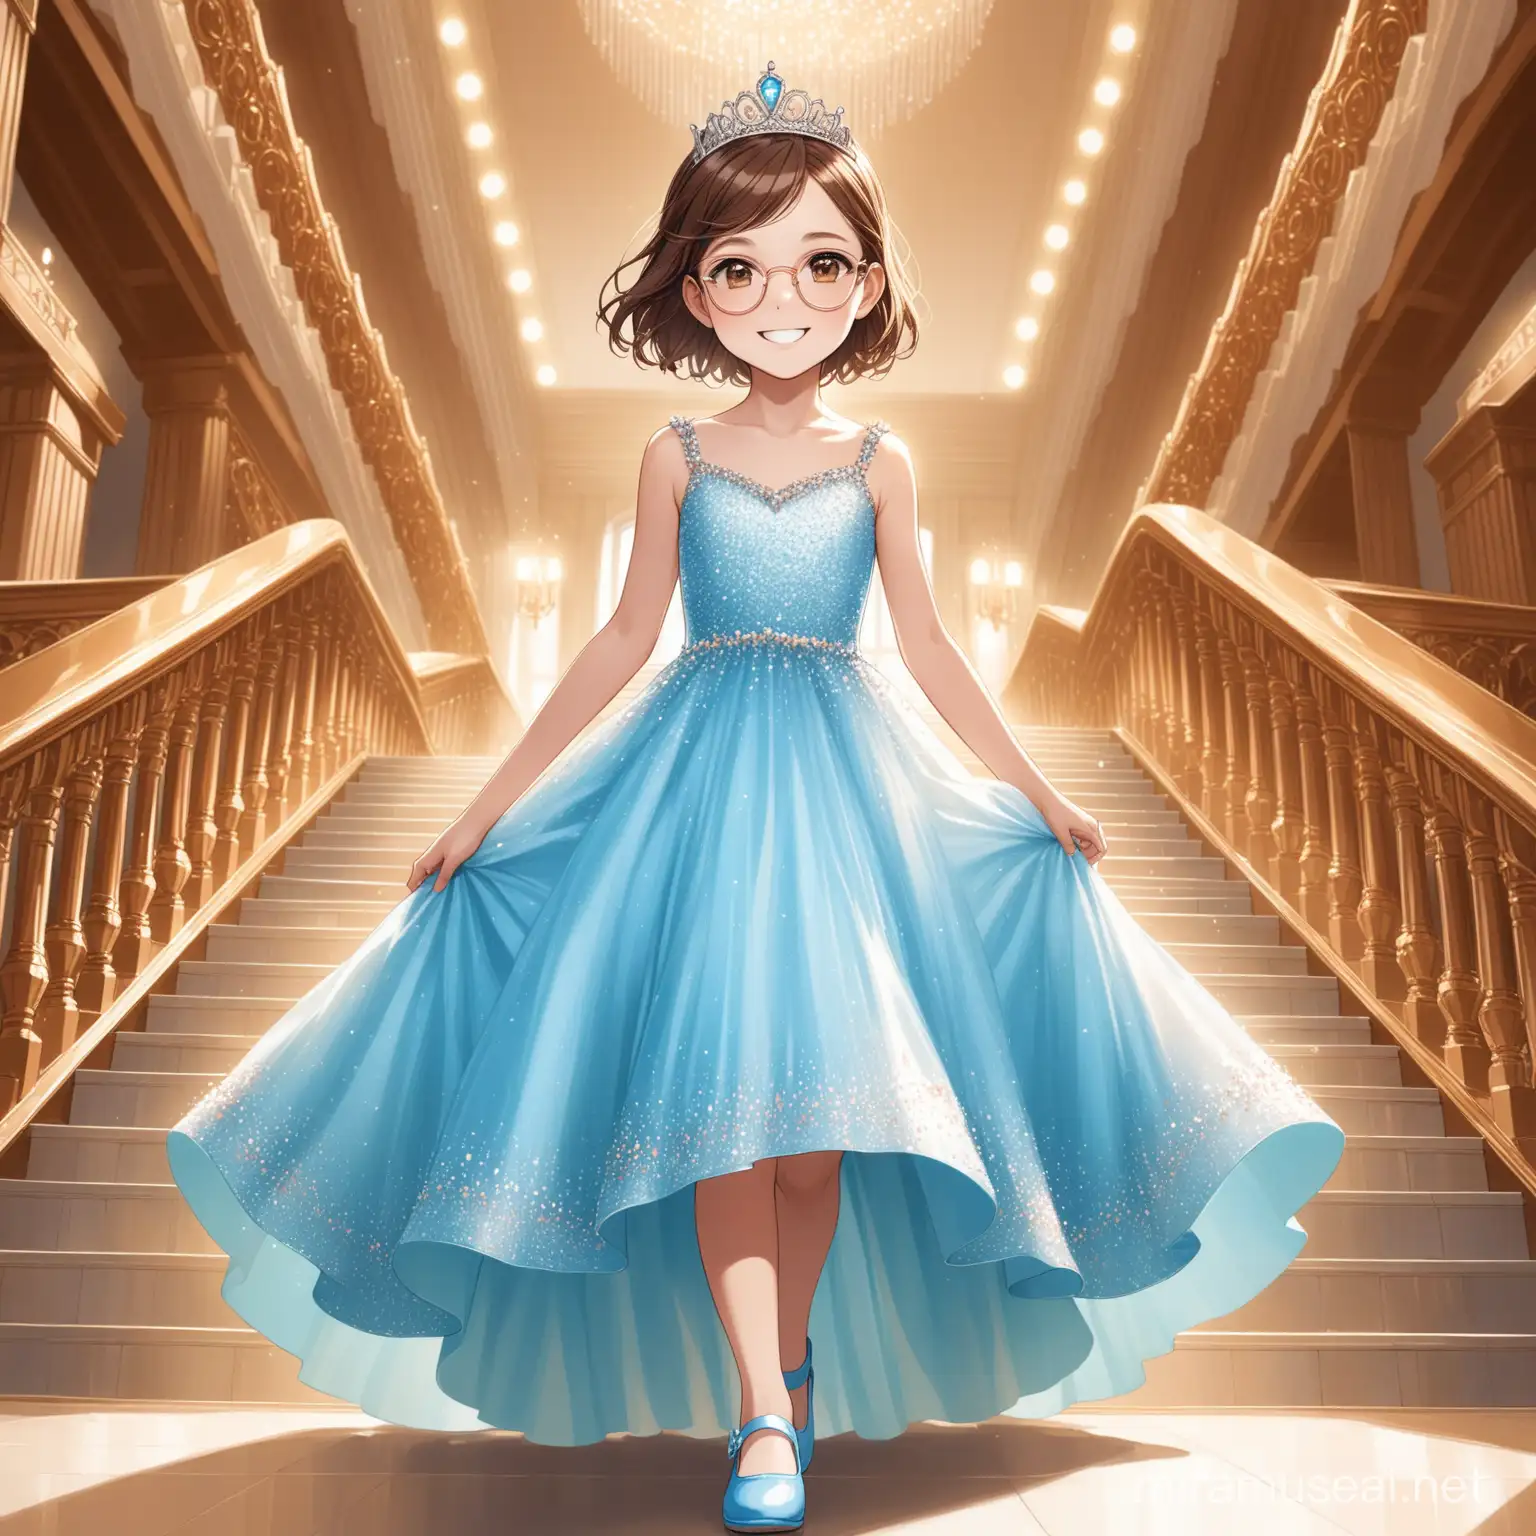 Smiling Girl in Silver Tiara Descending Grand Staircase in Blue Ball Gown